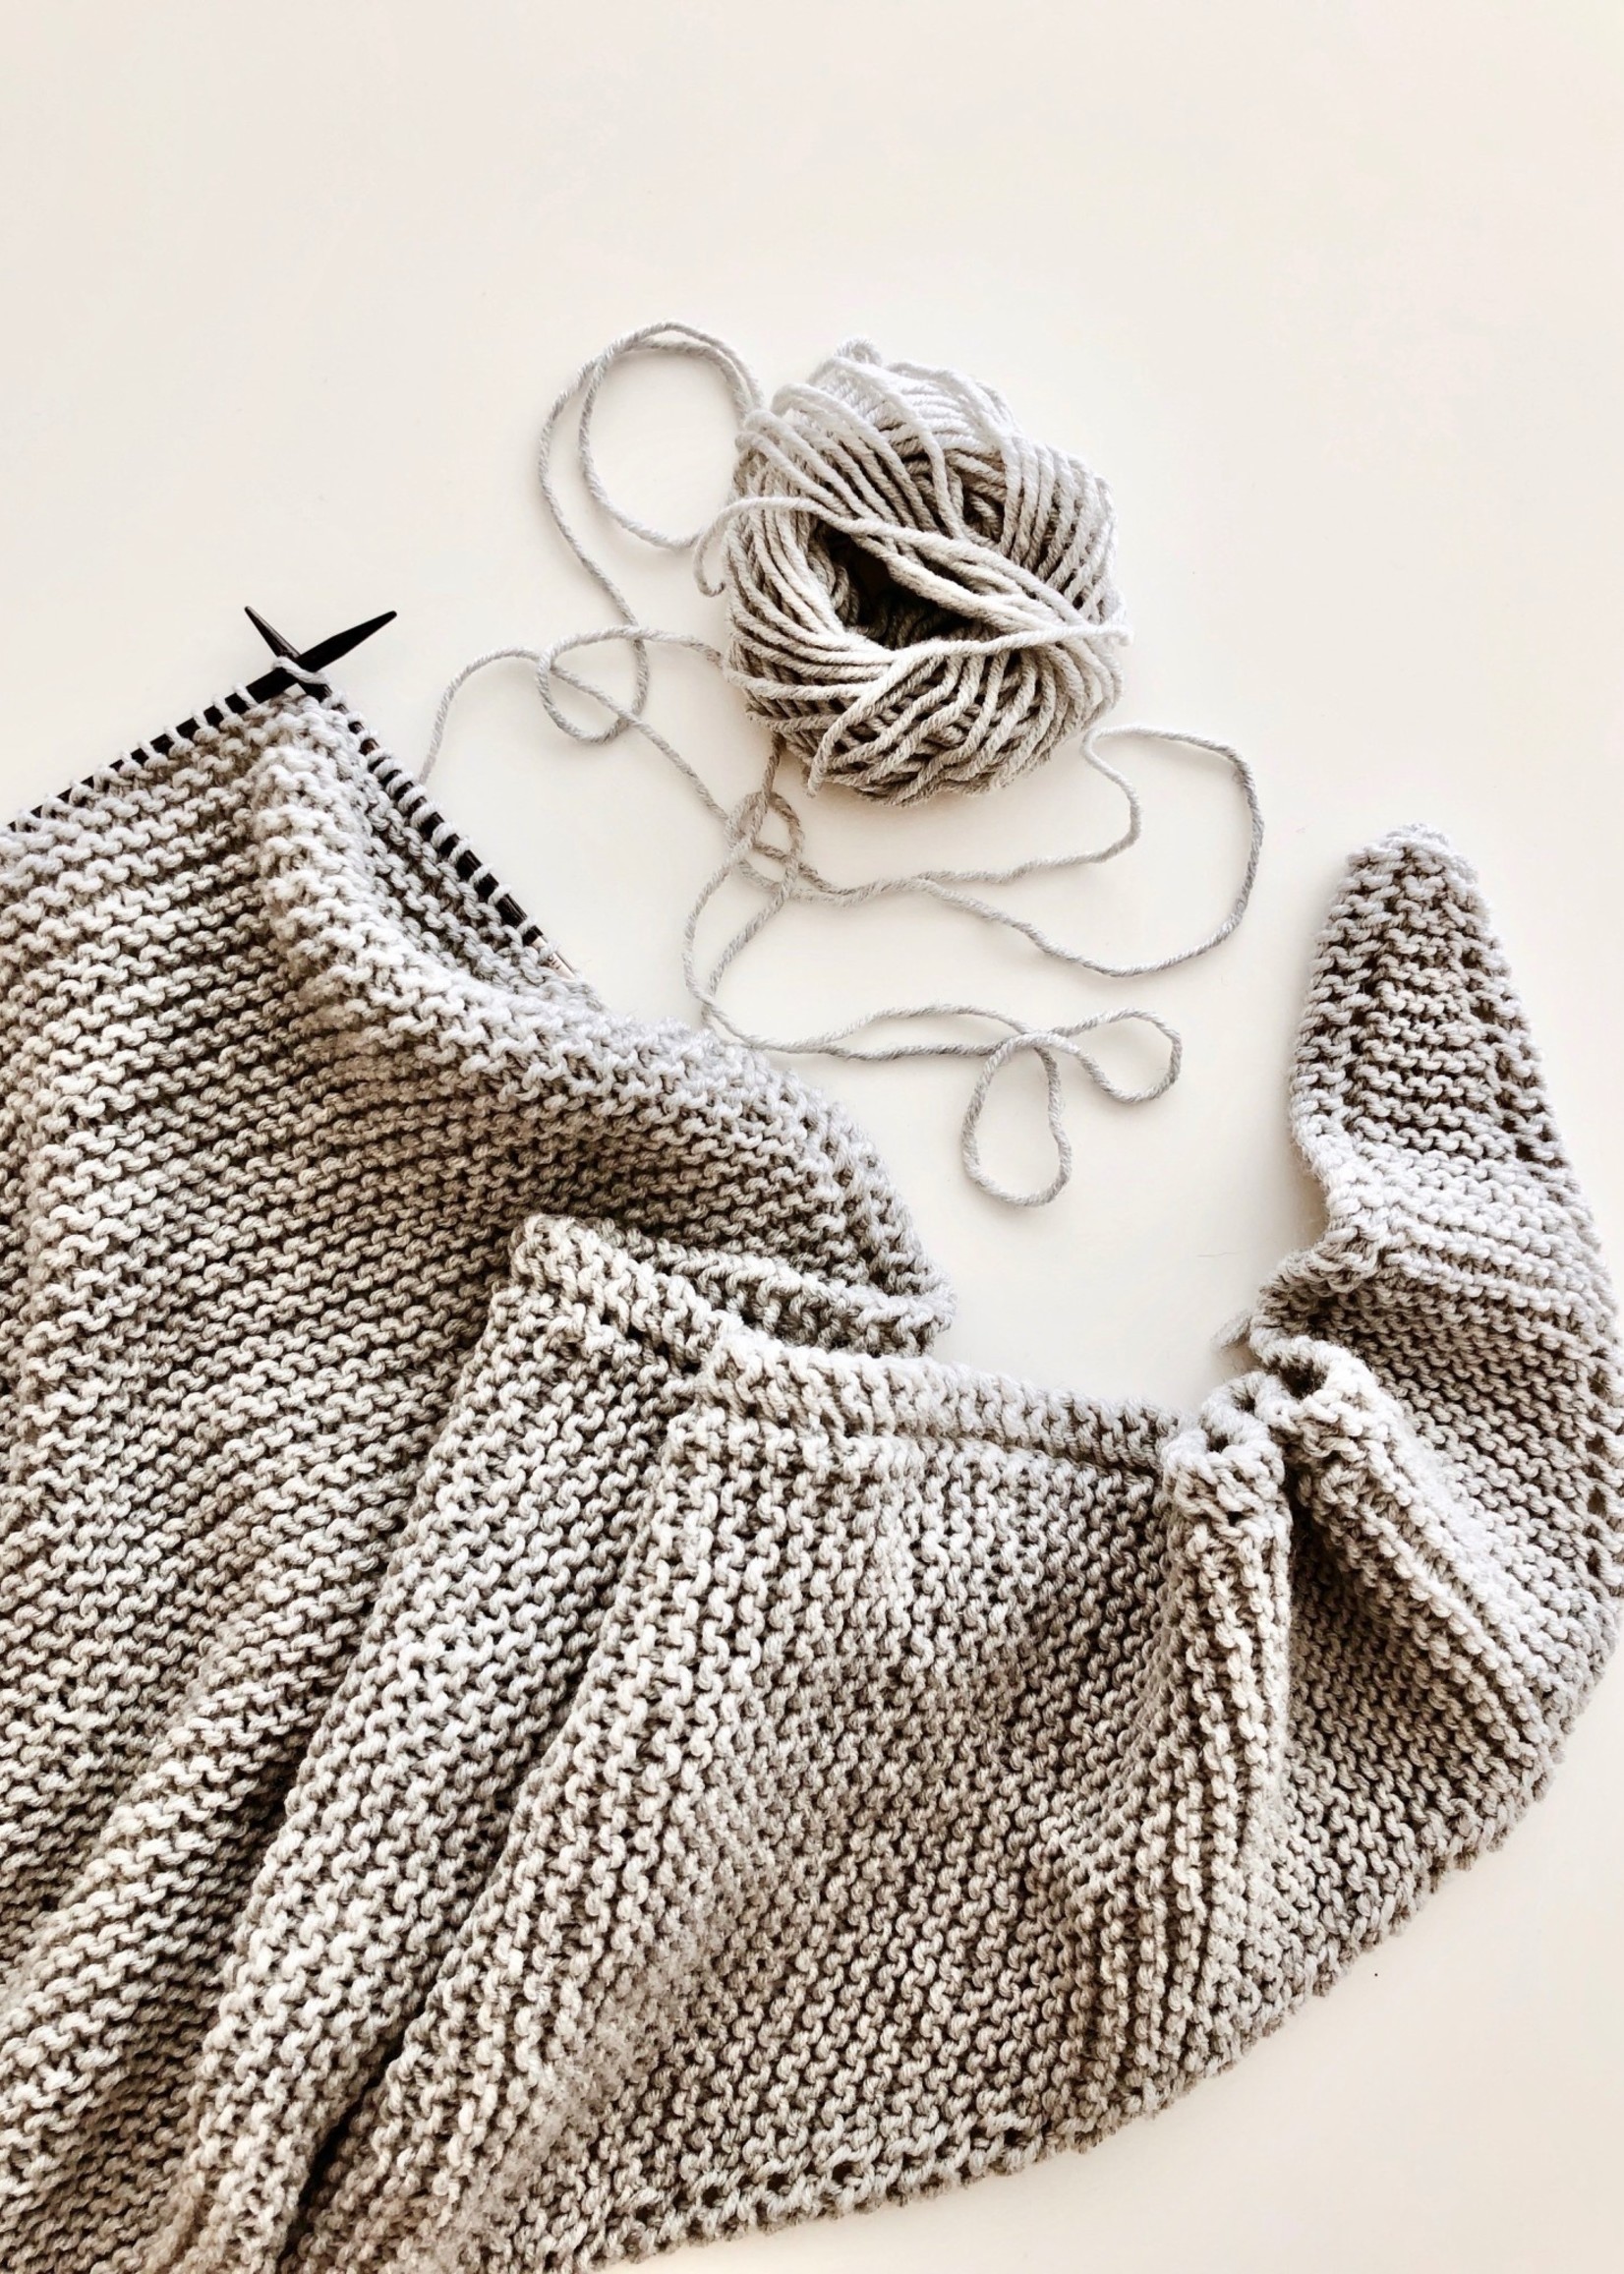 In Person - Learn to Knit Part 2